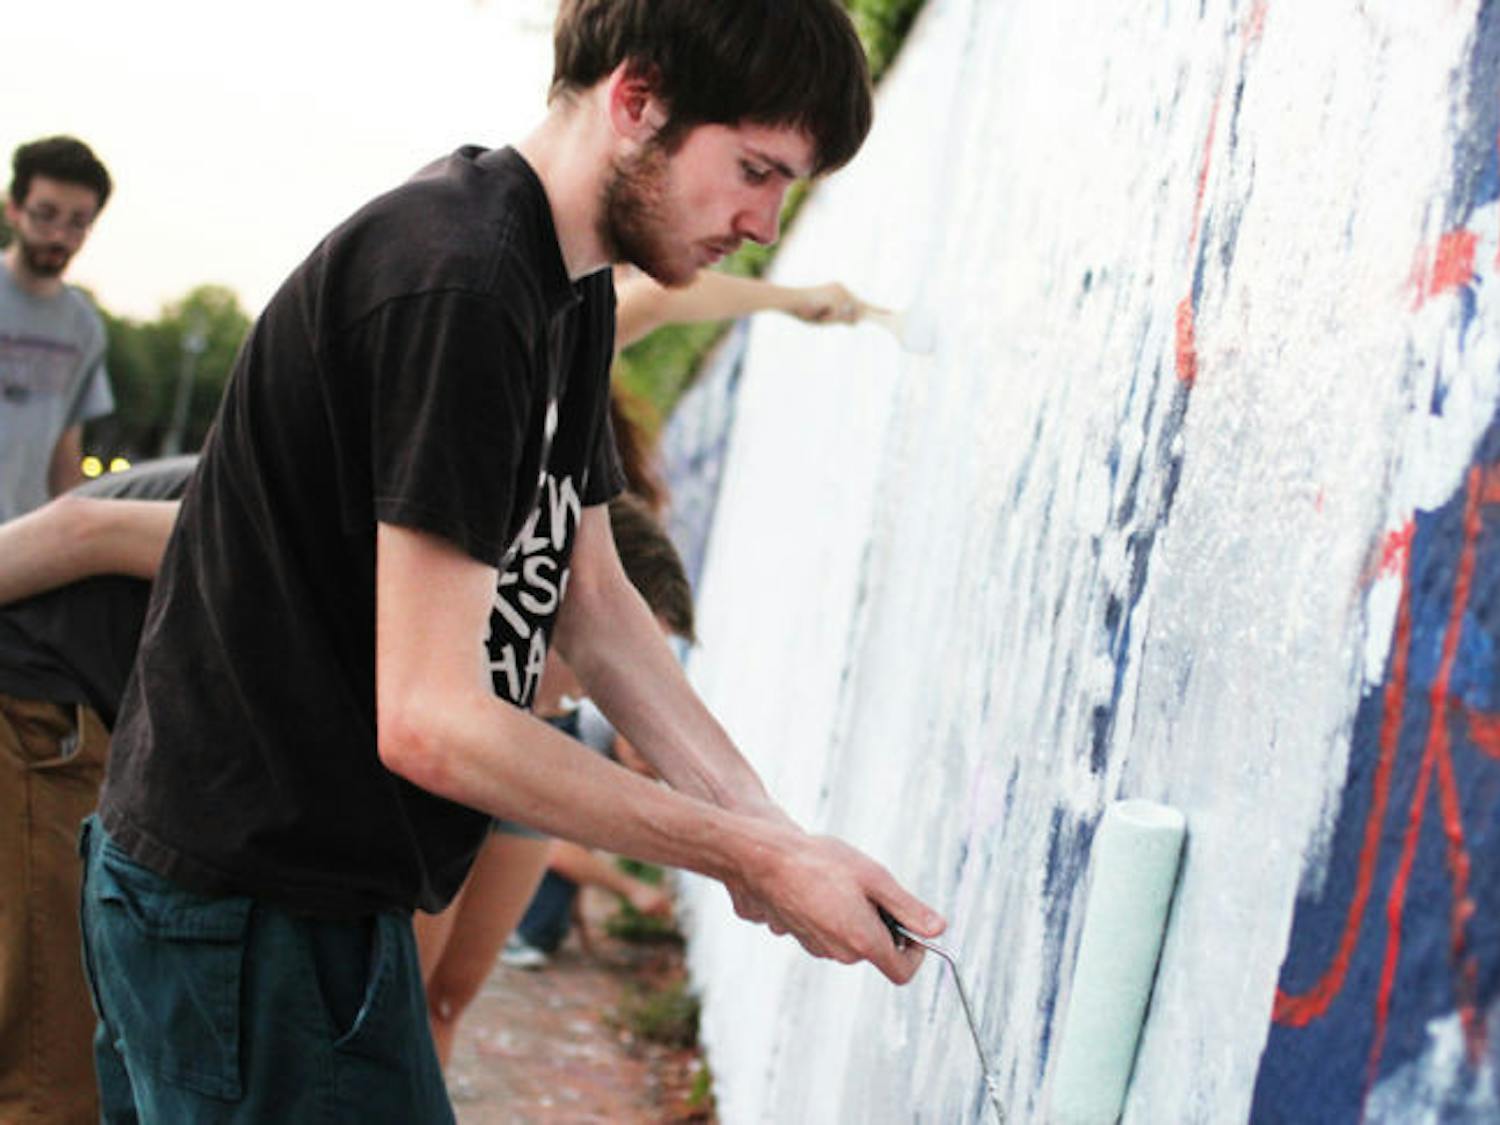 Josh Bush, a 21-year-old UF computer science student, paints on the 34th Street Wall as part of a UF SDS event Monday evening.